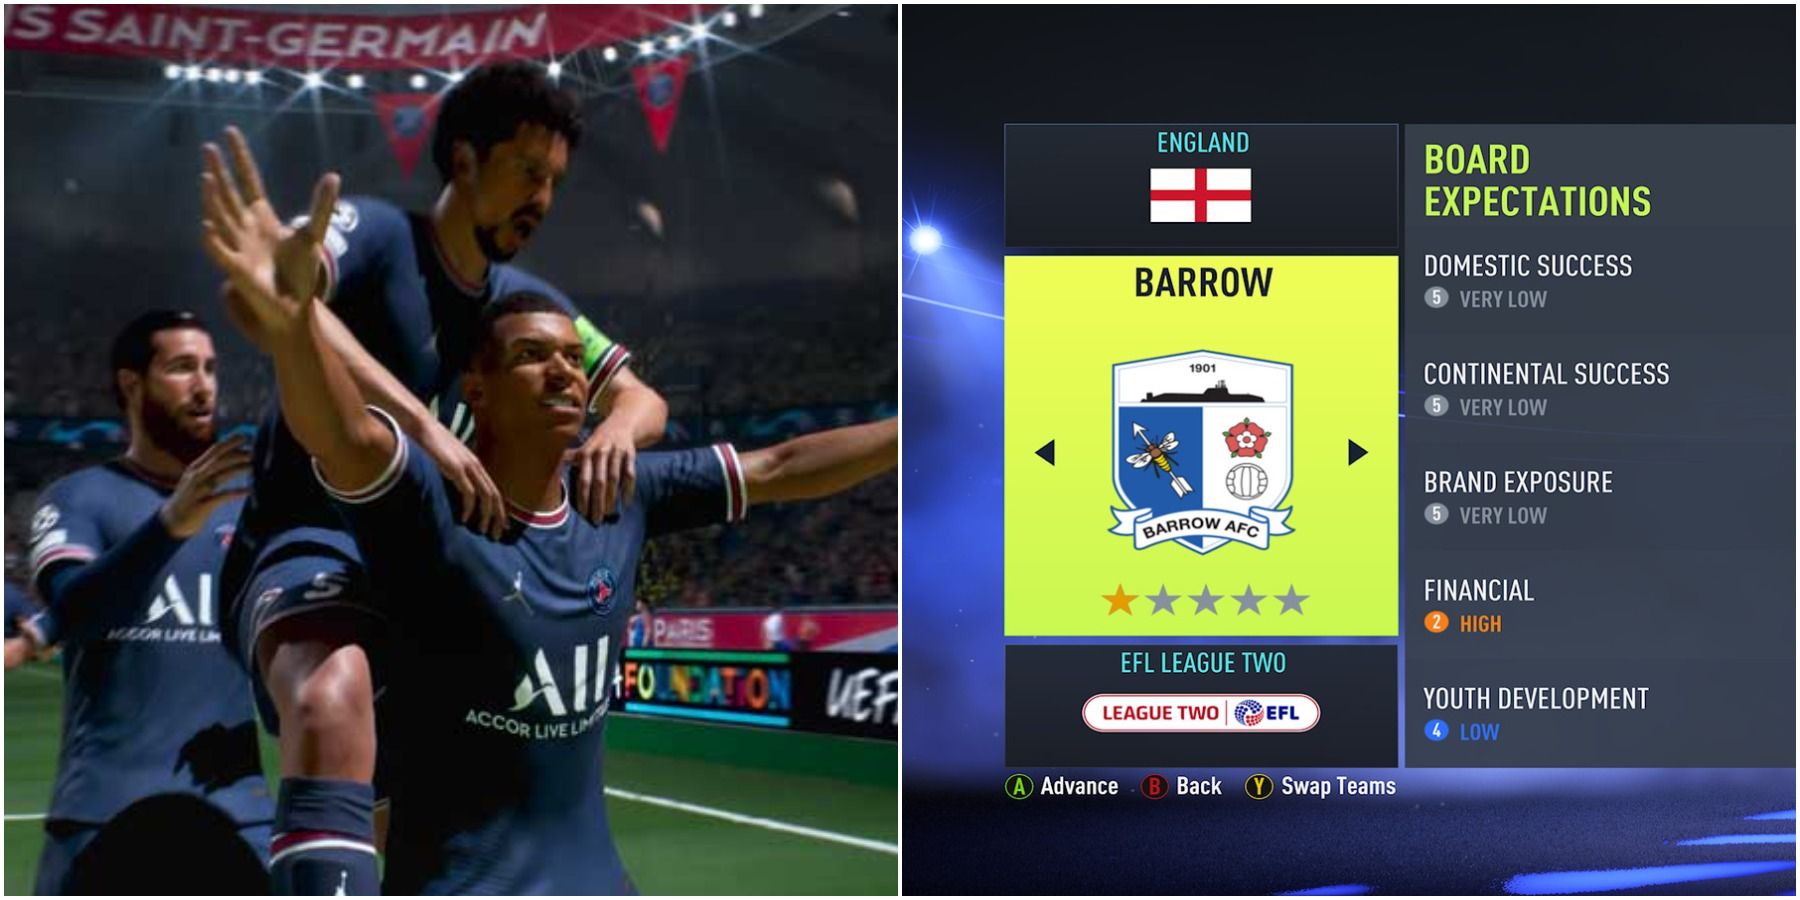 (Left) PSG players celebrating (Right) Barrow details